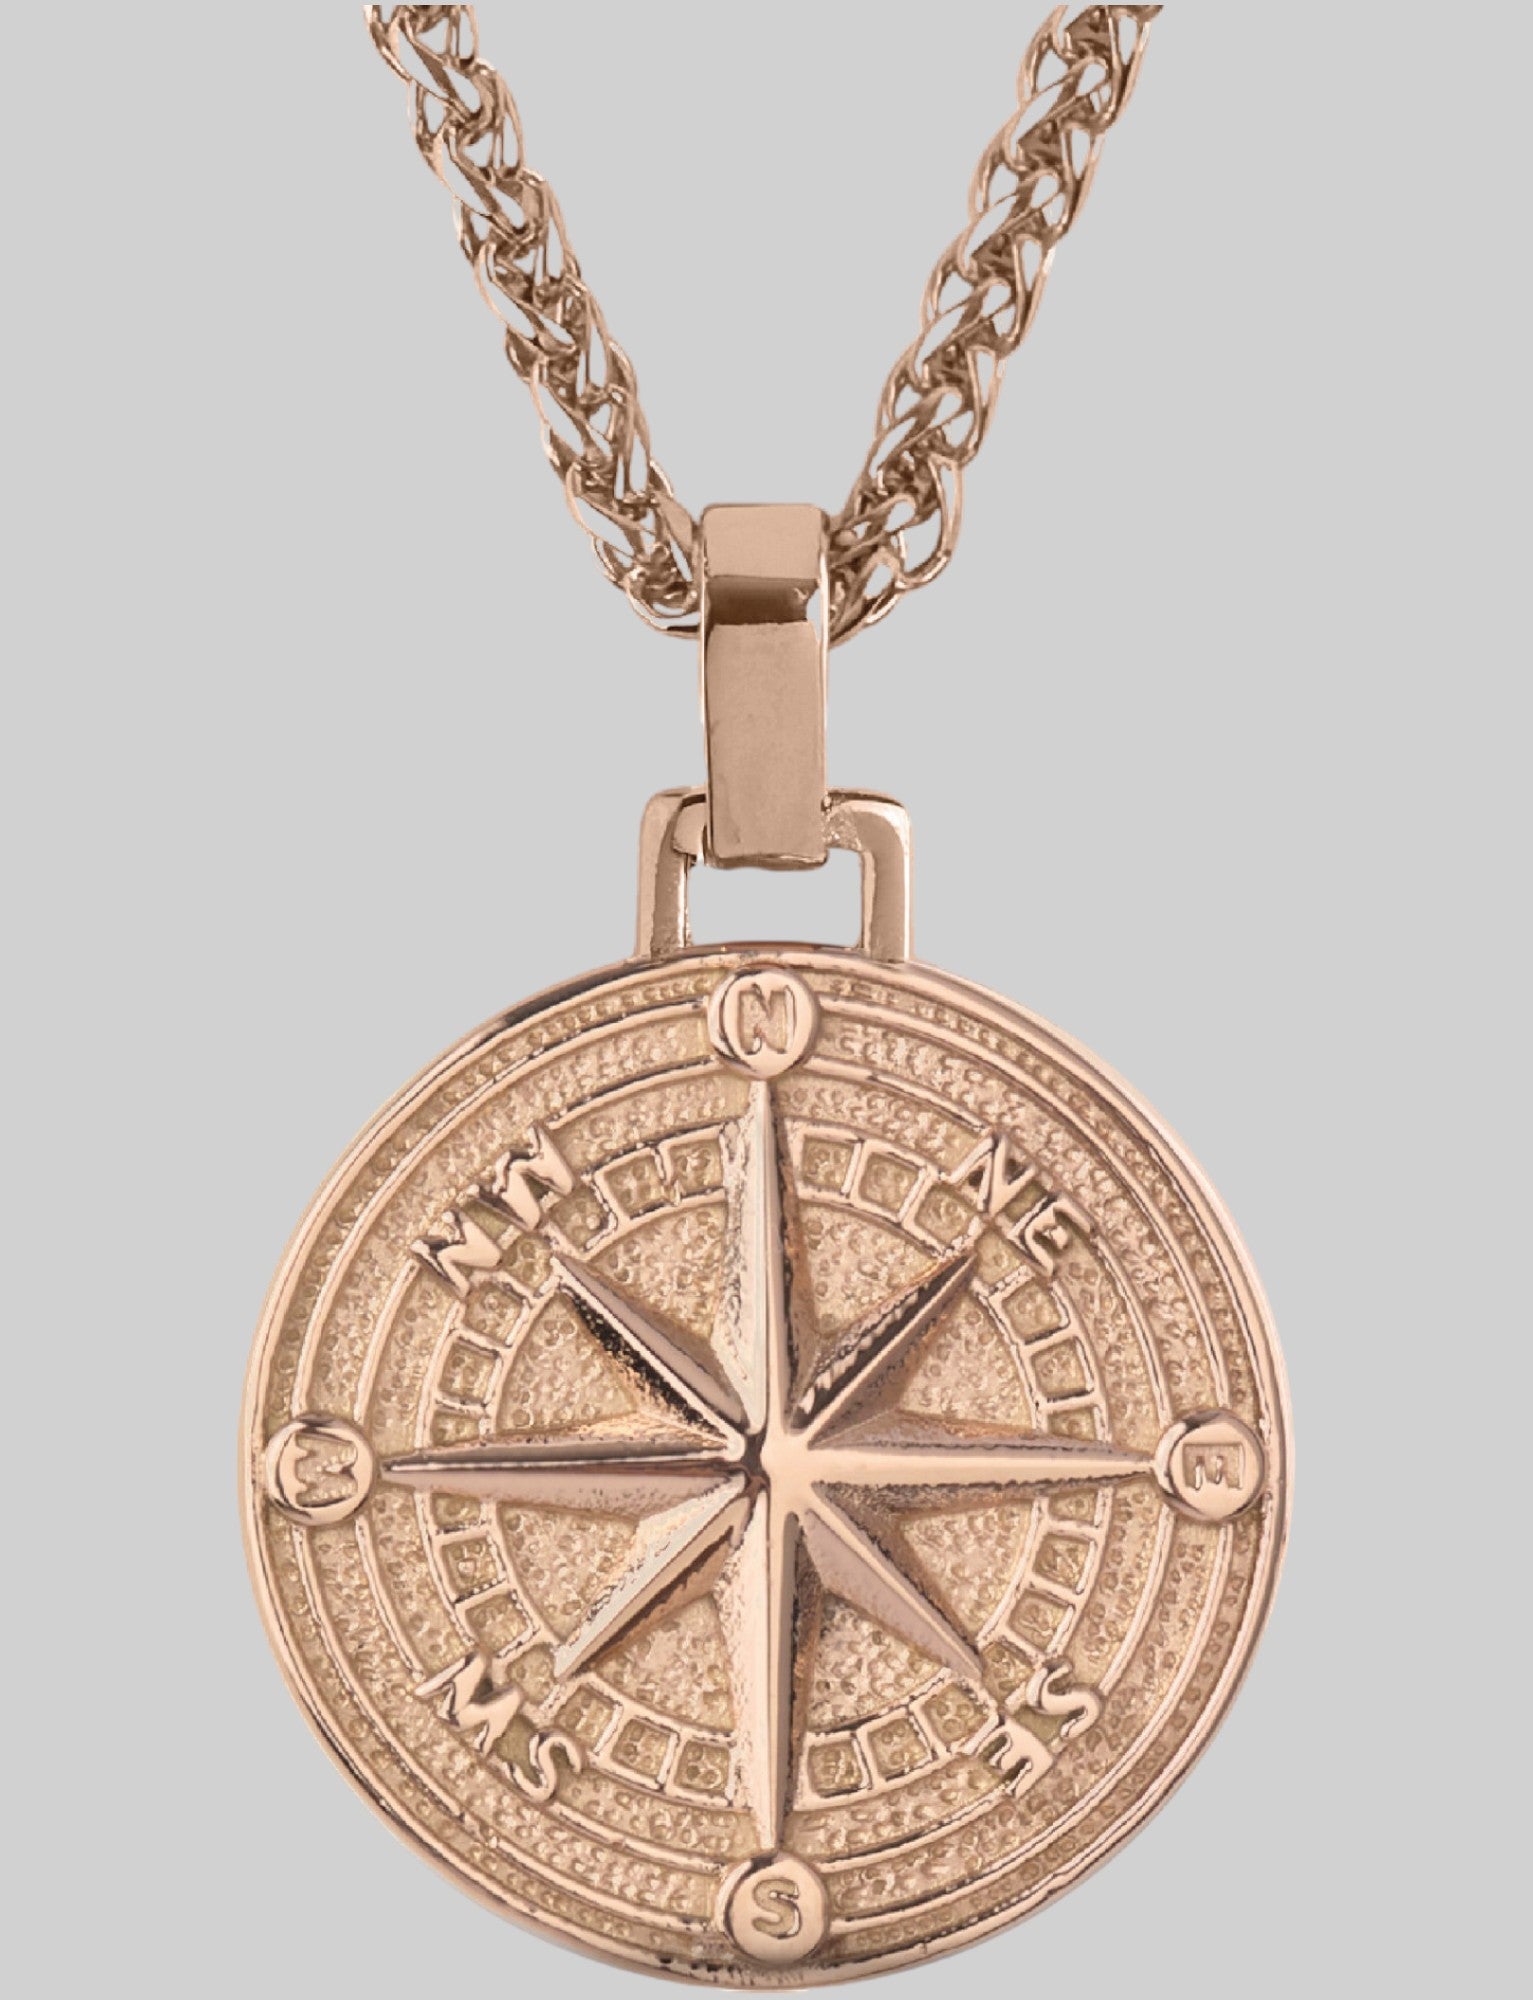 Buy Mens Necklace, Silver Compass Pendant Men, Silver Chain Round Compass  Necklace Mens Jewelry, Thick Chain Pendant Necklace by Twistedpendant  Online in India - Etsy